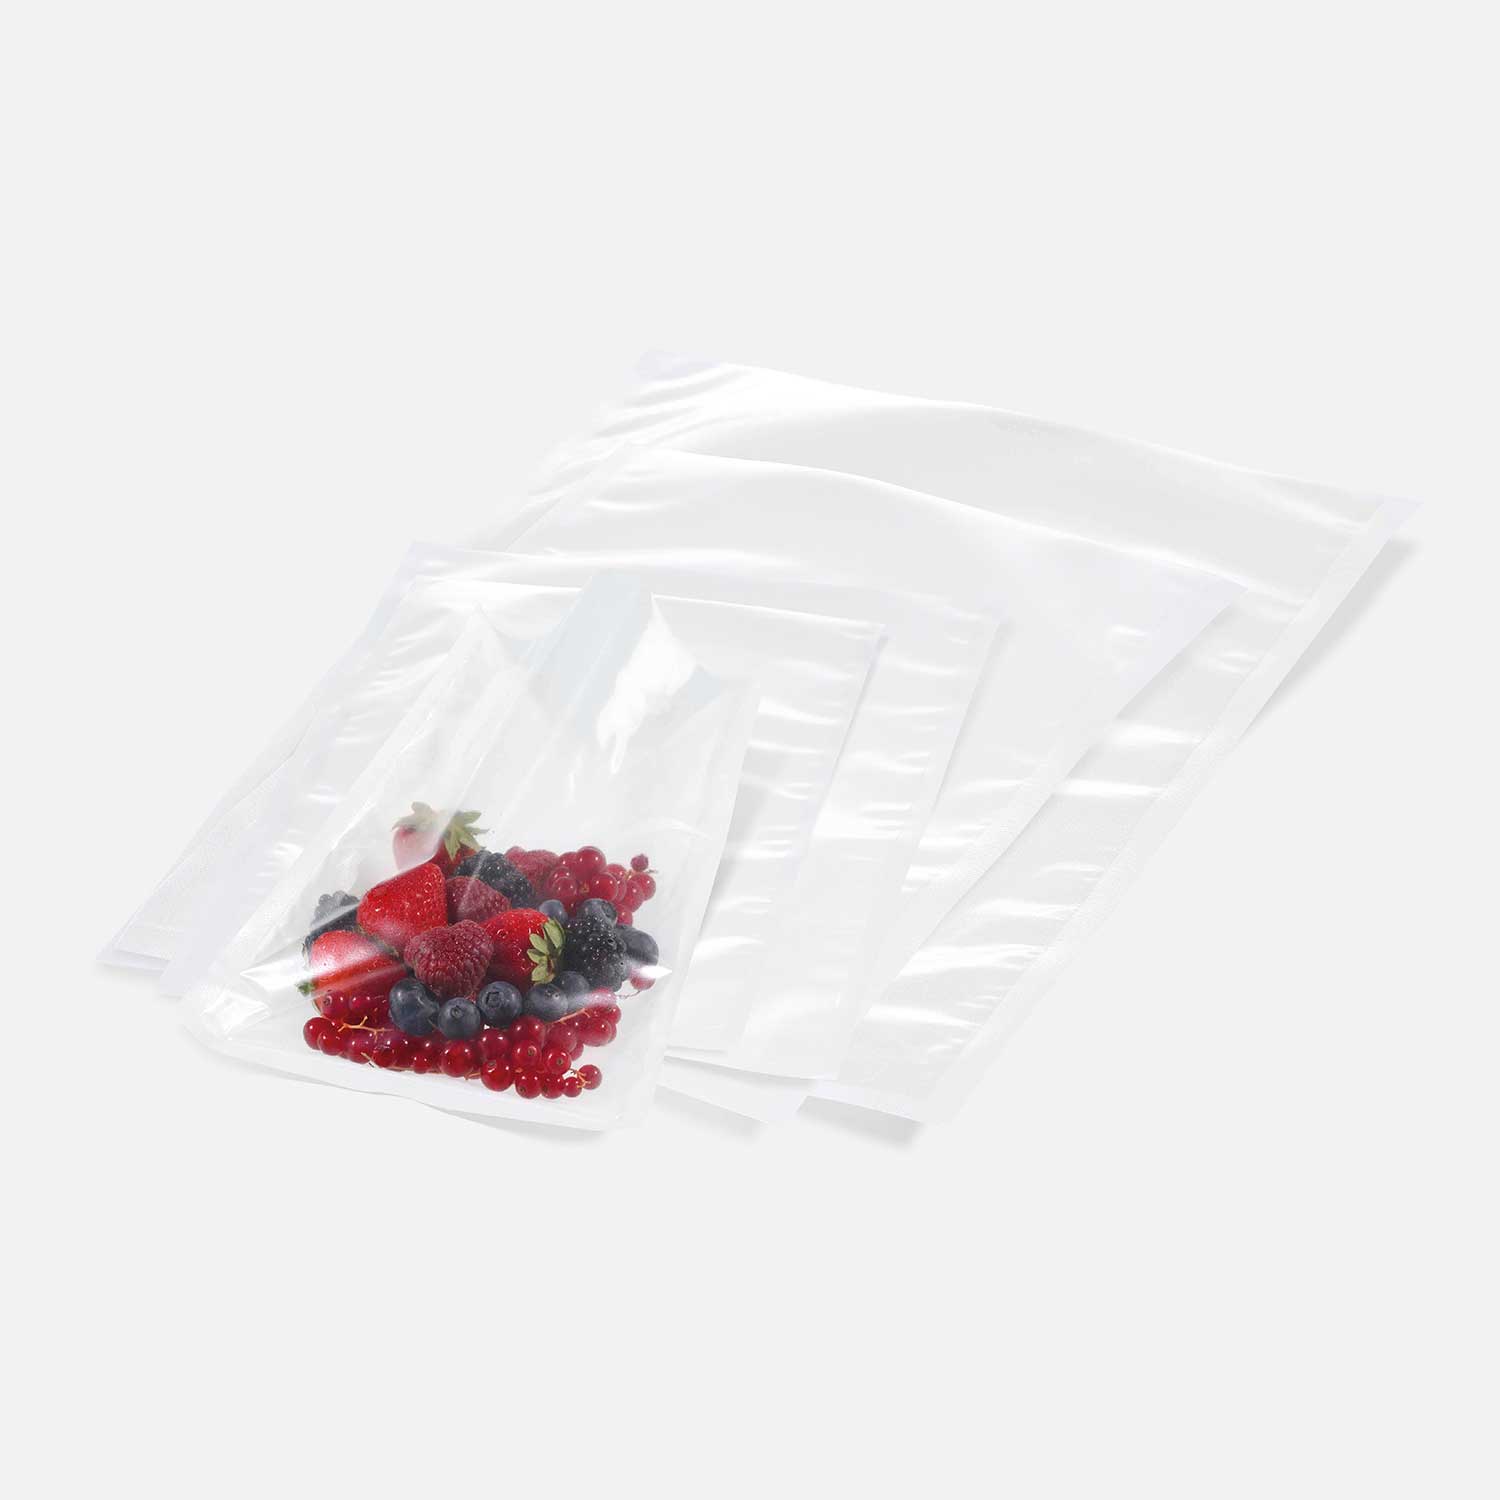 Structured vacuum bag mix-set with berries not yet vacuum-sealed